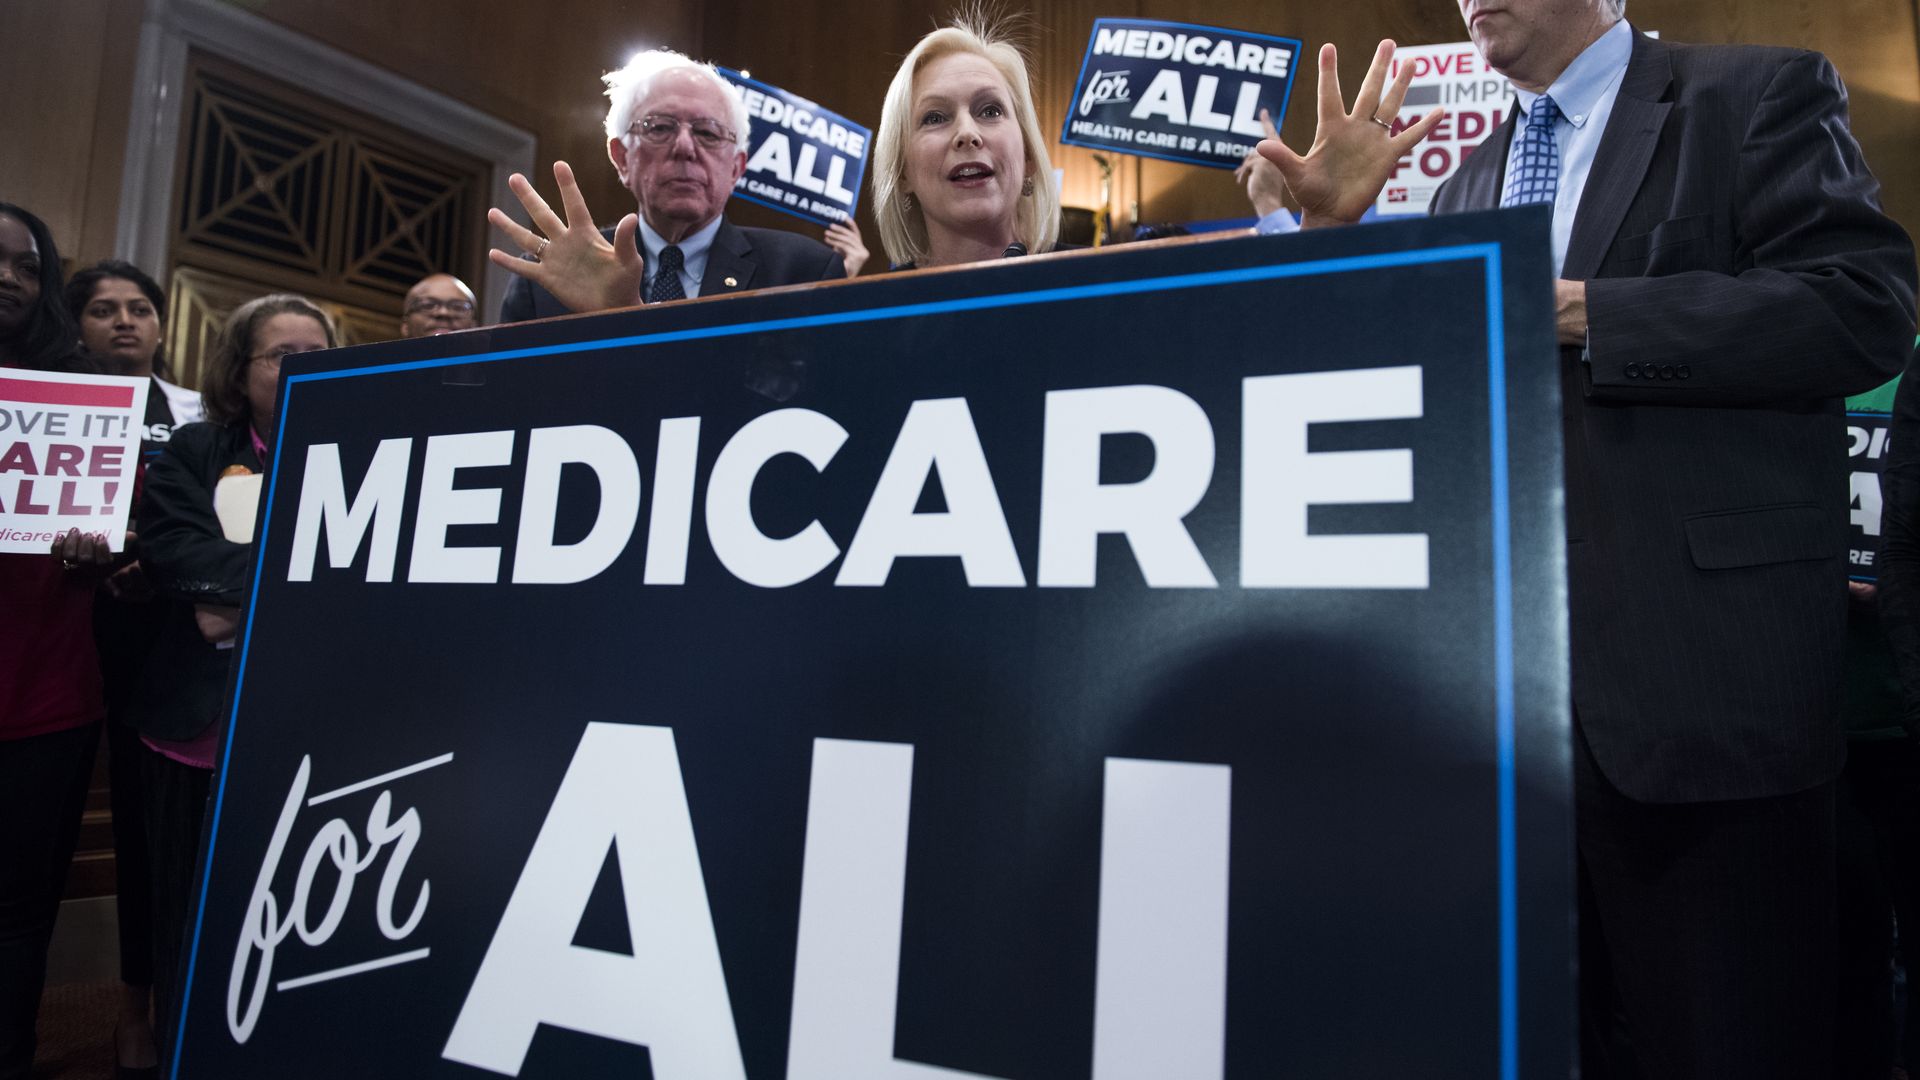 Kirsten Gillibrand ans Bernie Sanders standing behind a medicare for all sign